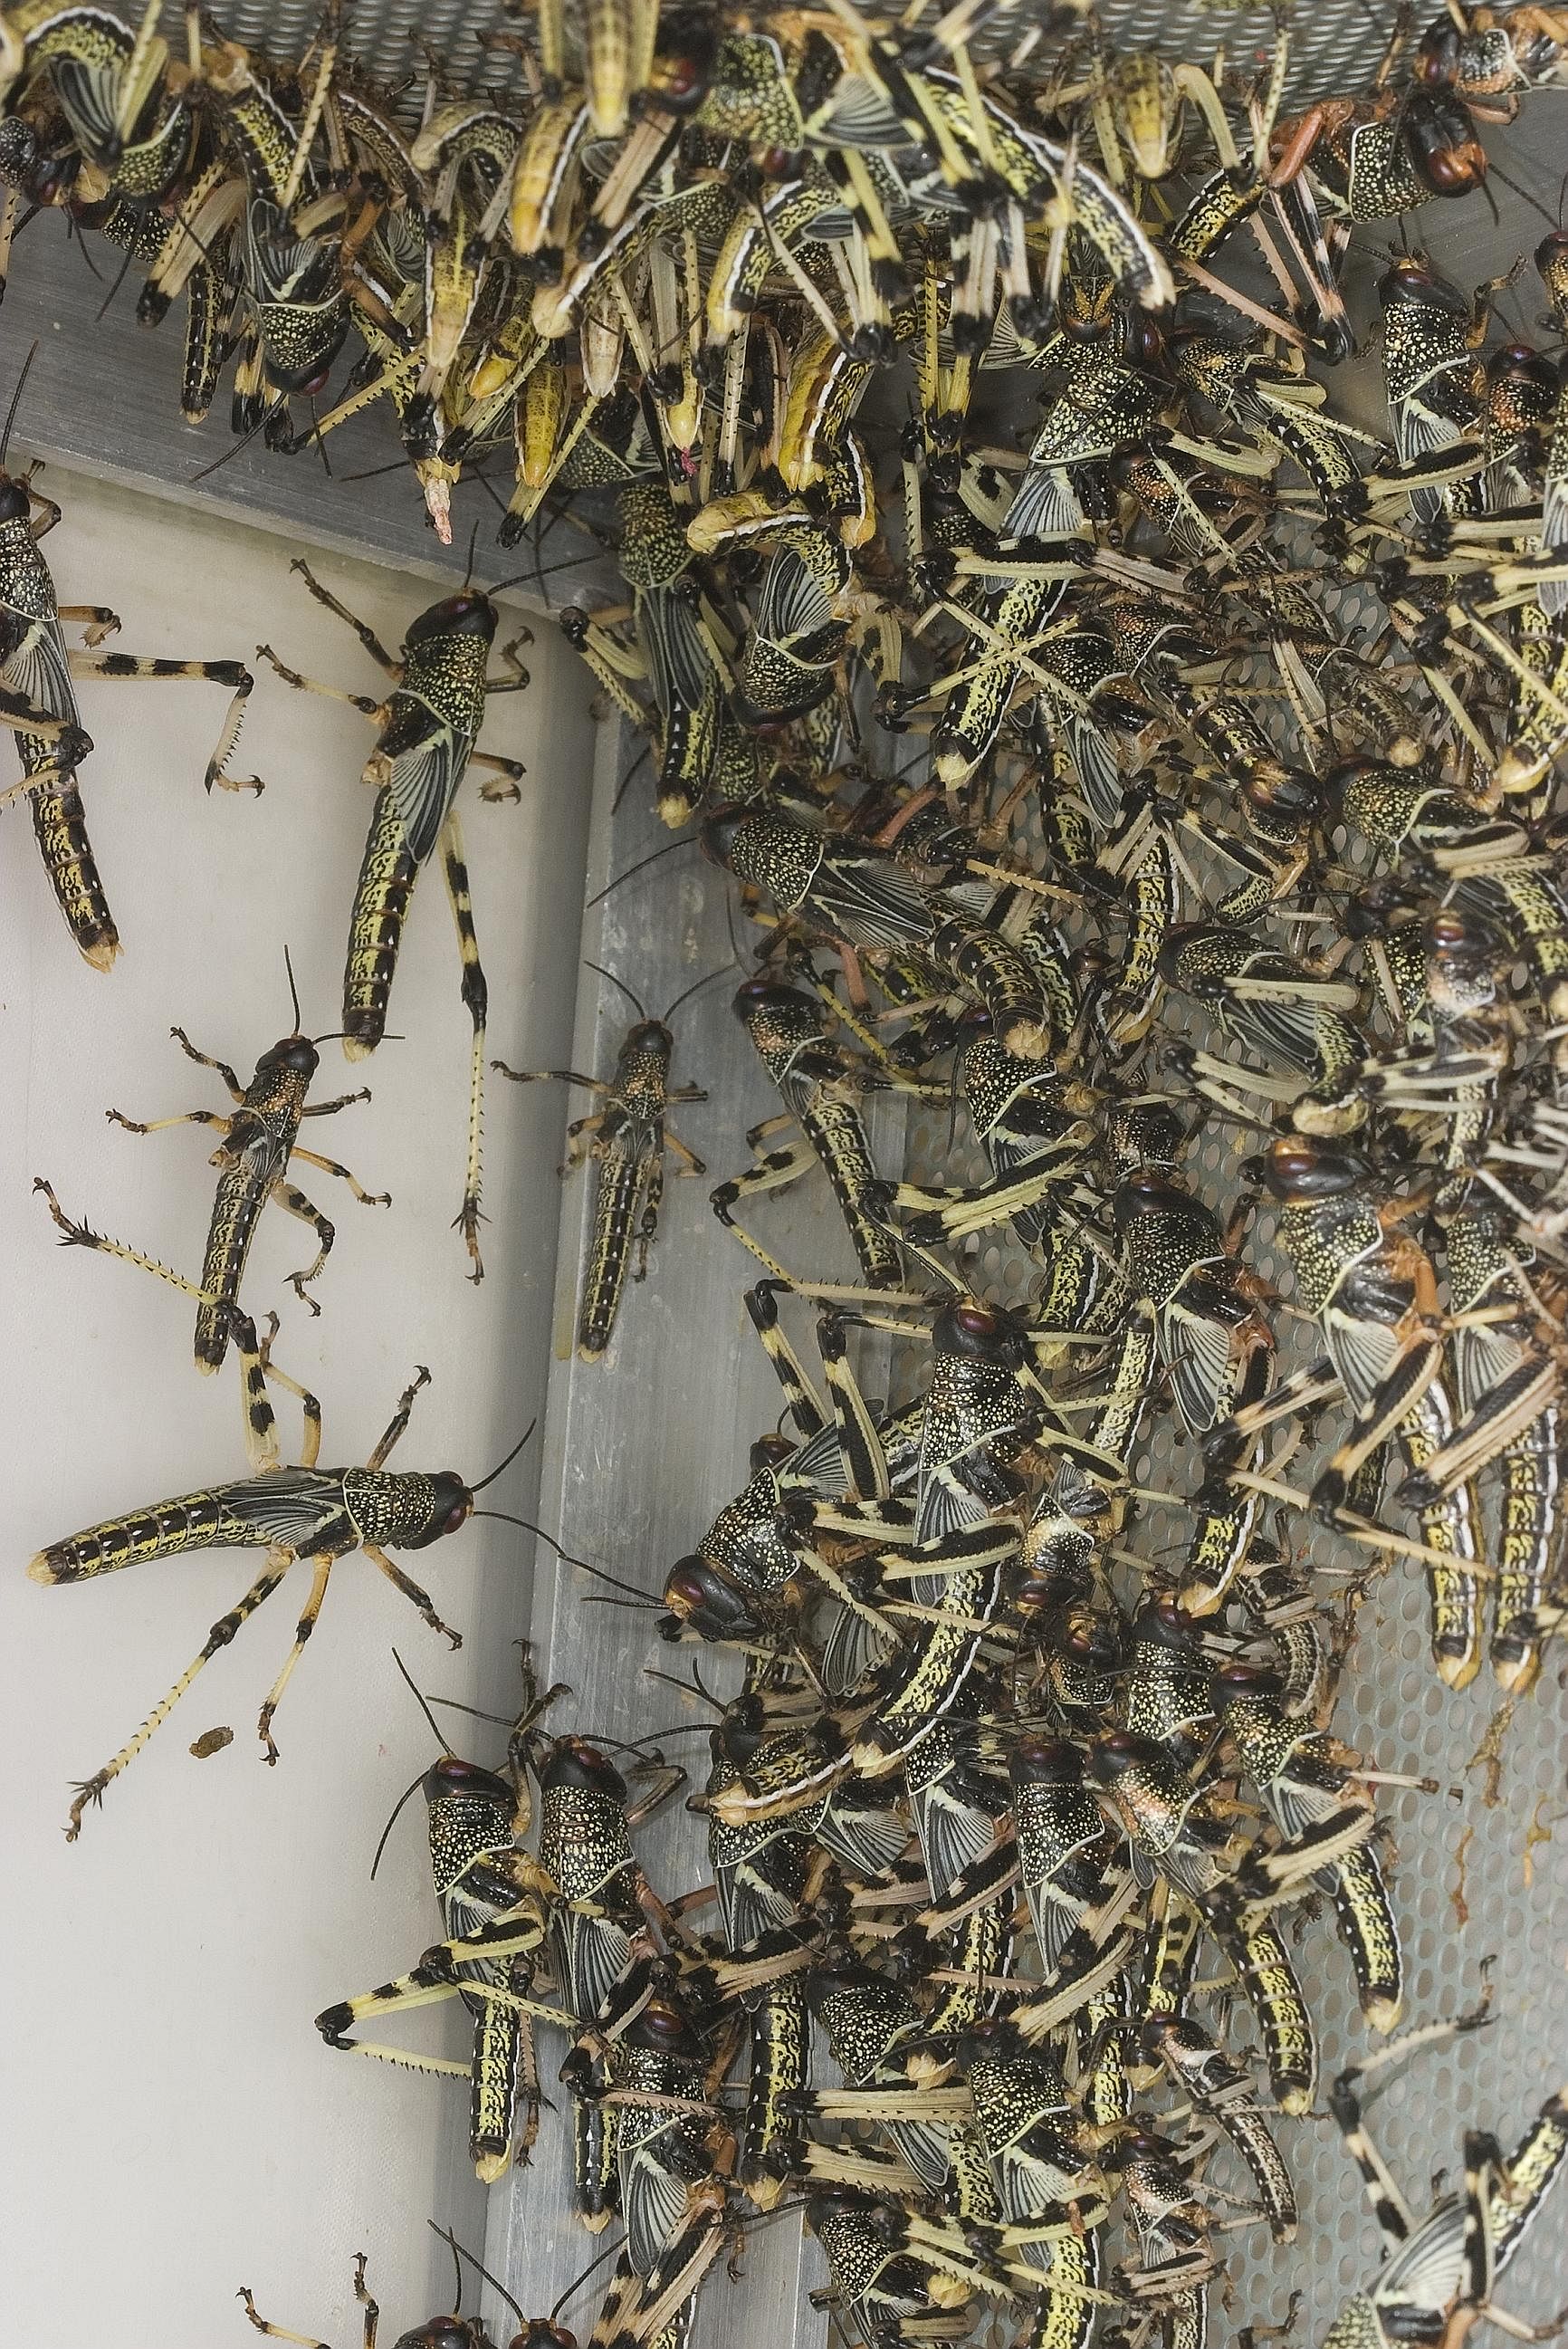 Small pockets of locusts first appeared last June and have spread across an area of northern Argentina spanning about 6,452 sq km amid comfortable breeding conditions.